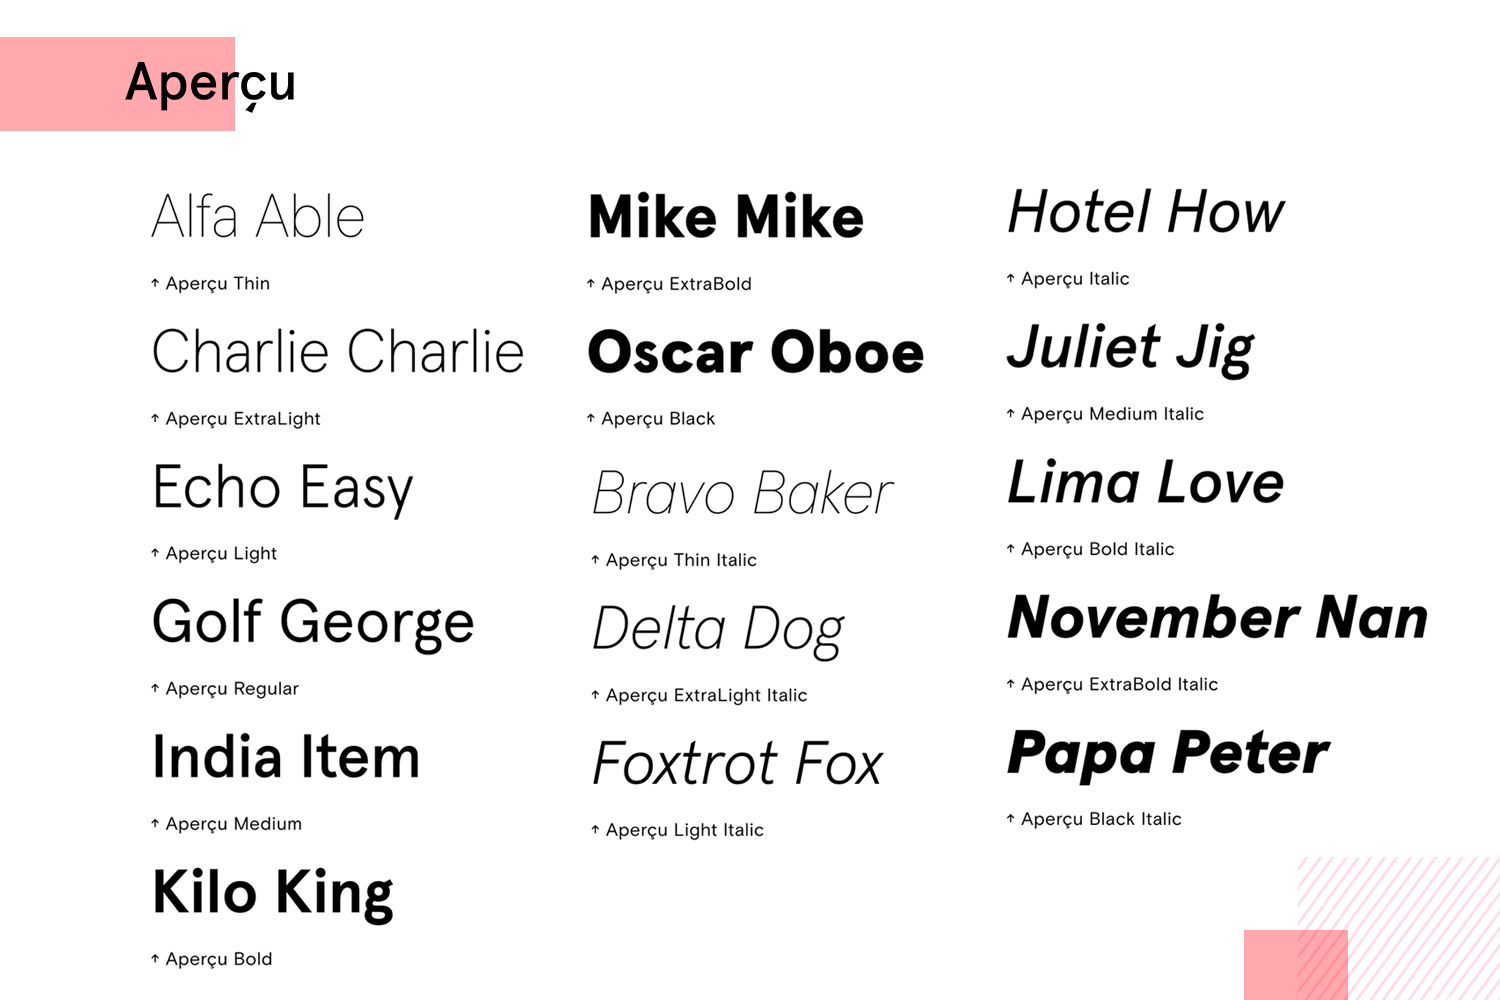 Aperçu font variations in bold, italic, regular, and book styles